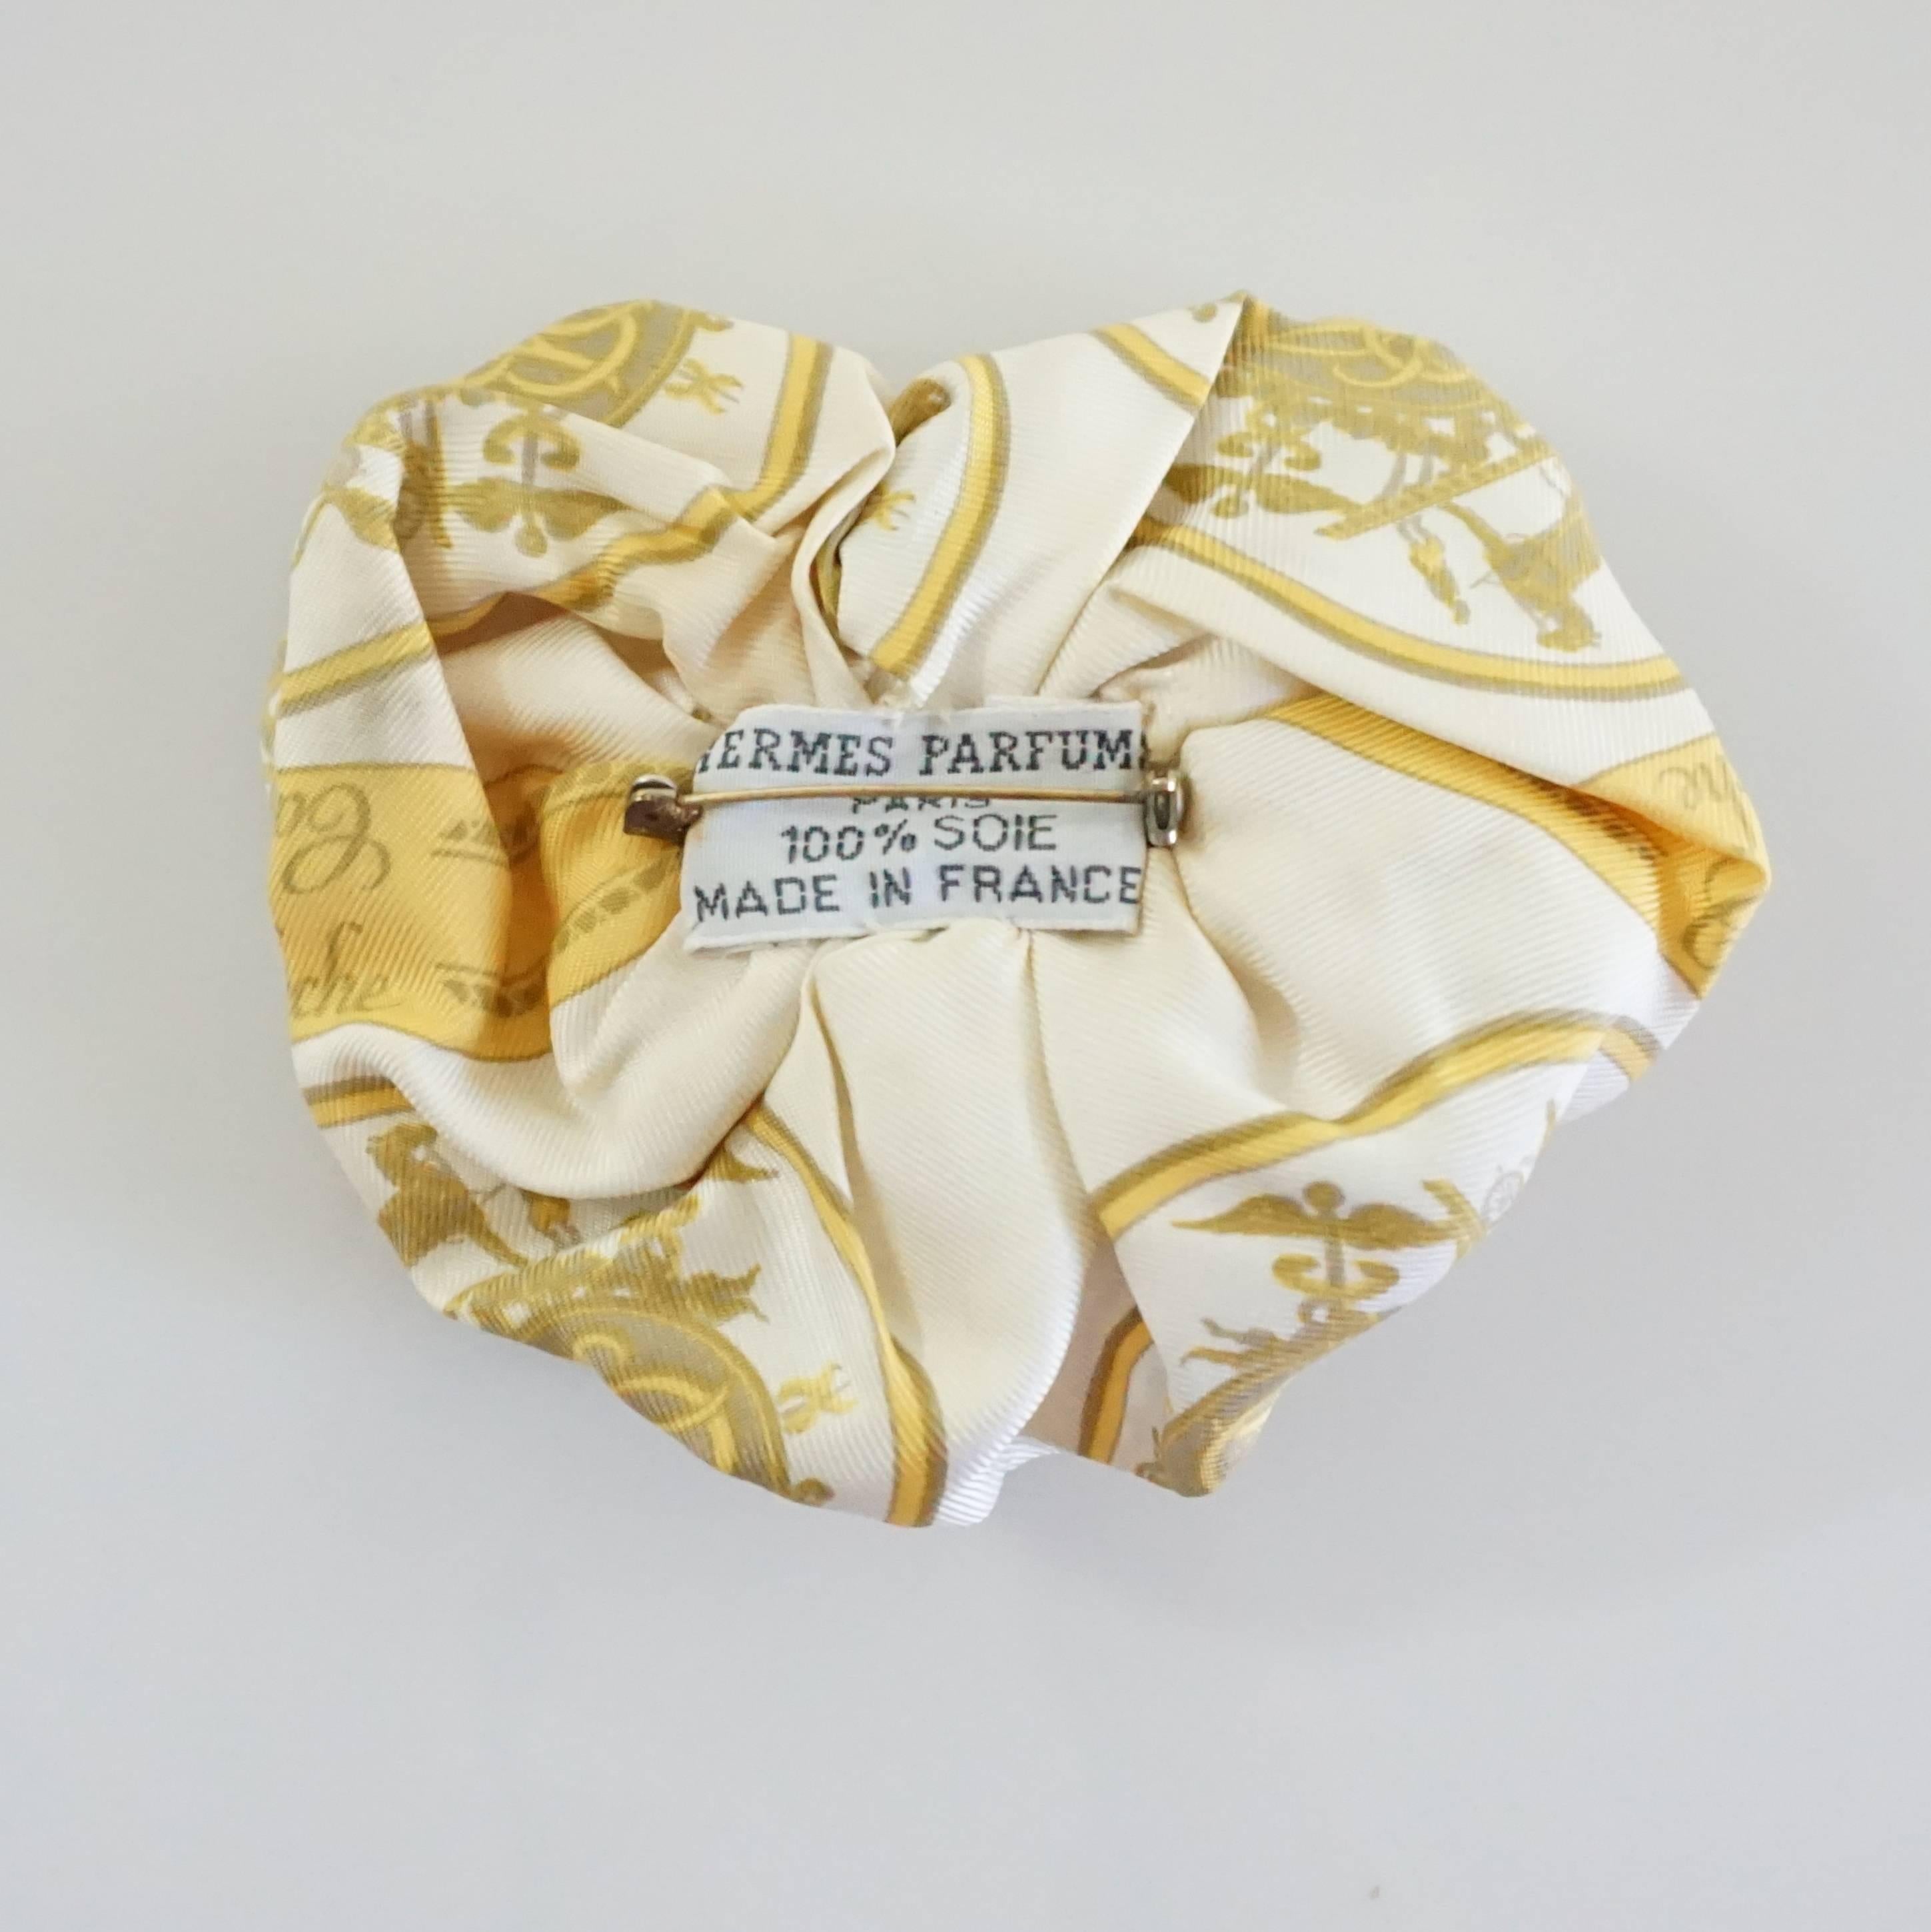 This Hermes brooch has a carriage print with ivory, gold, and tan colors. The fabric is silk and it is ruched to look like a camellia. It is in excellent vintage with minimal wear. 

Measurements
Height: 4